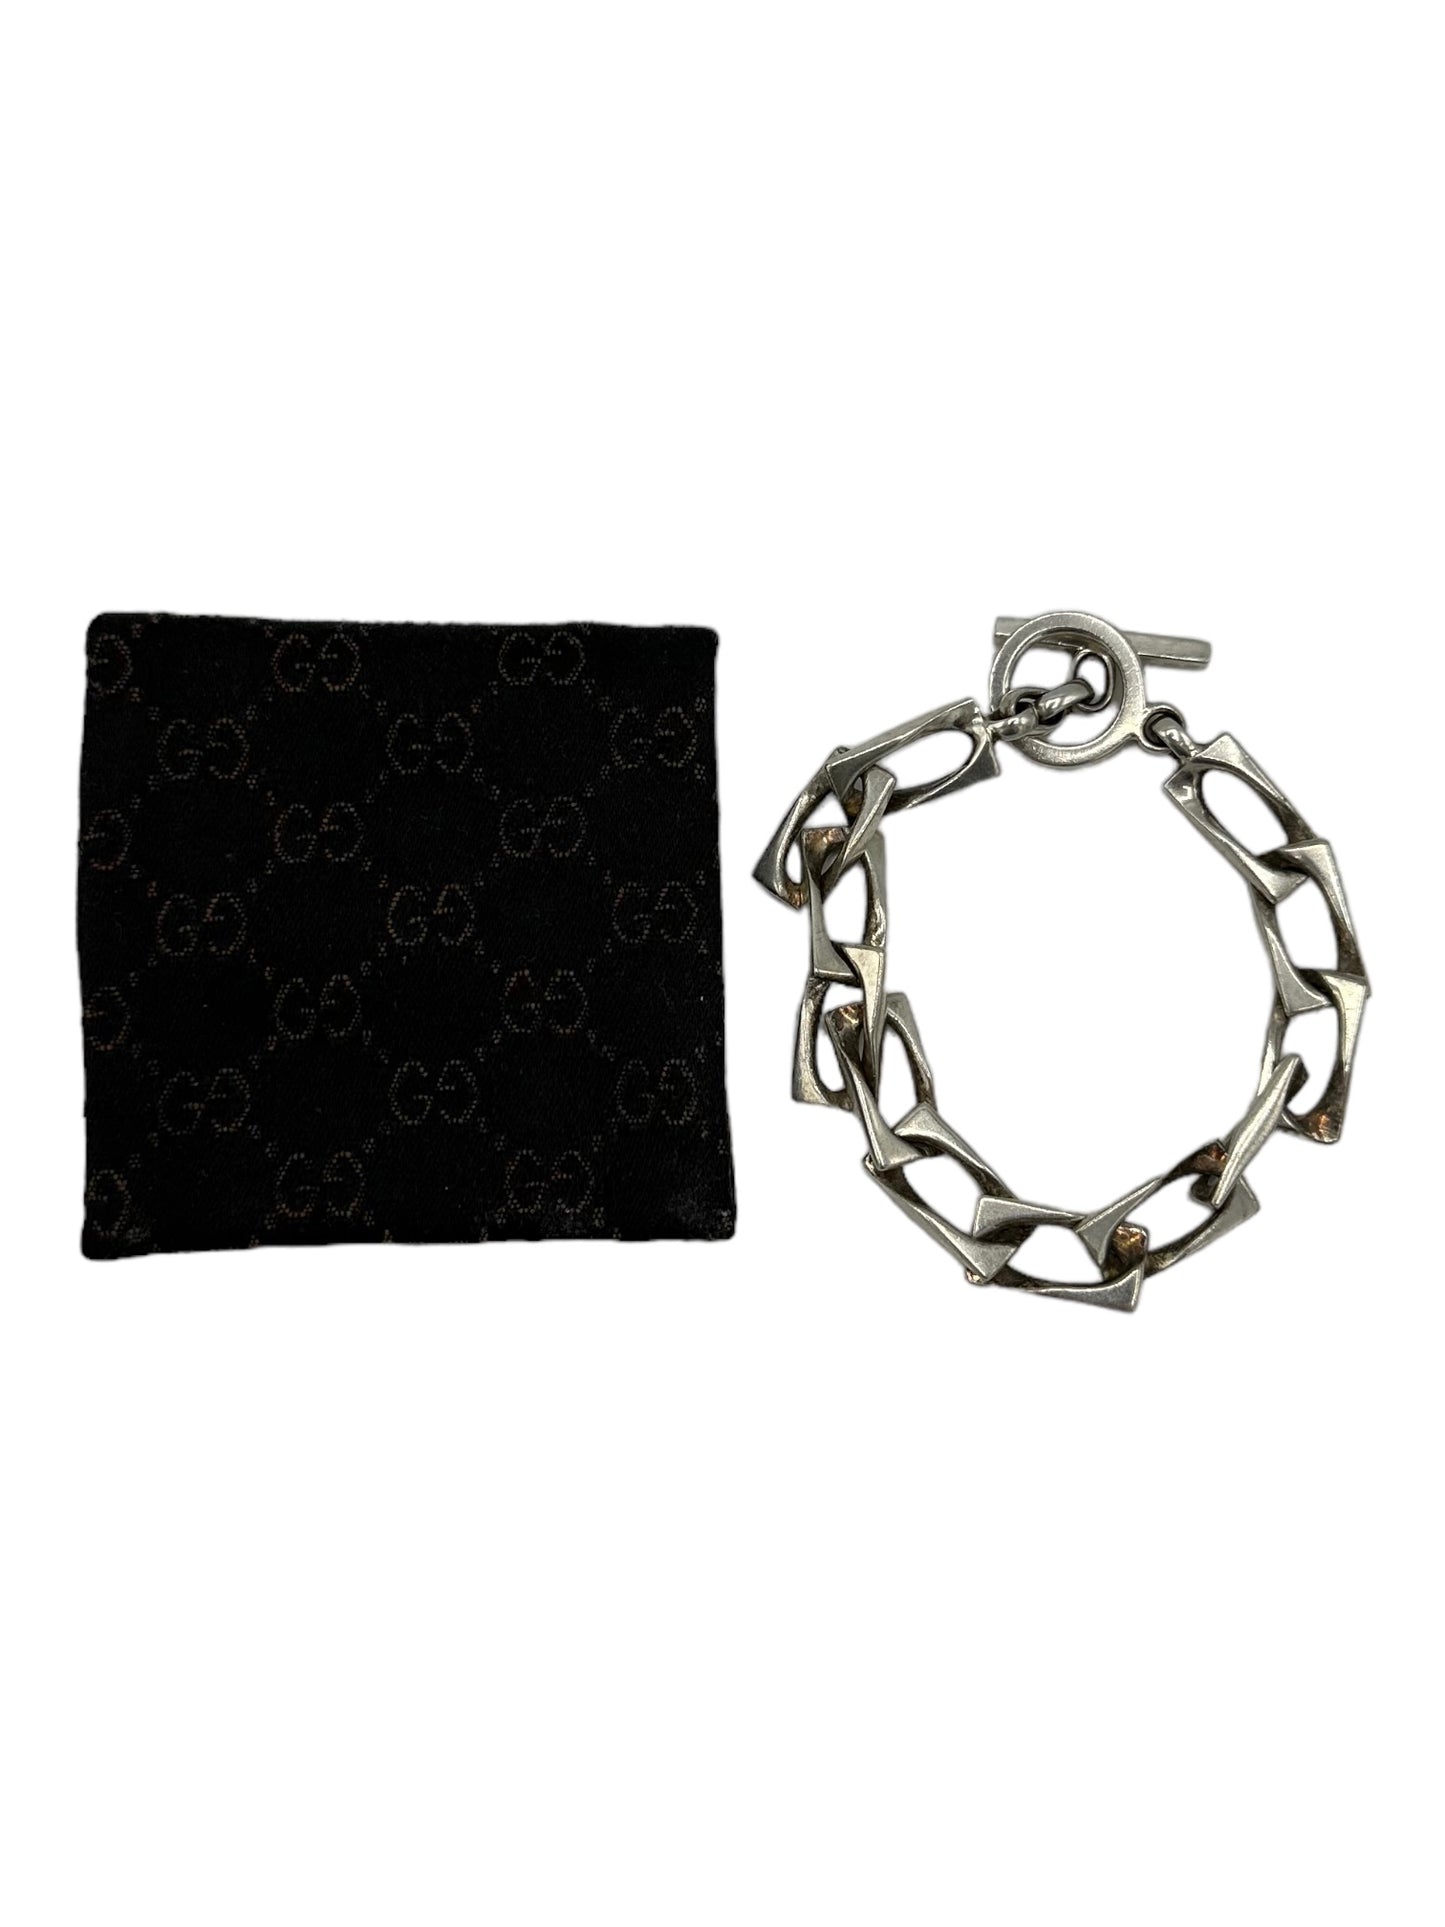 Gucci Silver Chunky Linked Bracelet - Genuine Design luxury consignment Calgary, Alberta, Canada New and pre-owned clothing, shoes, accessories.